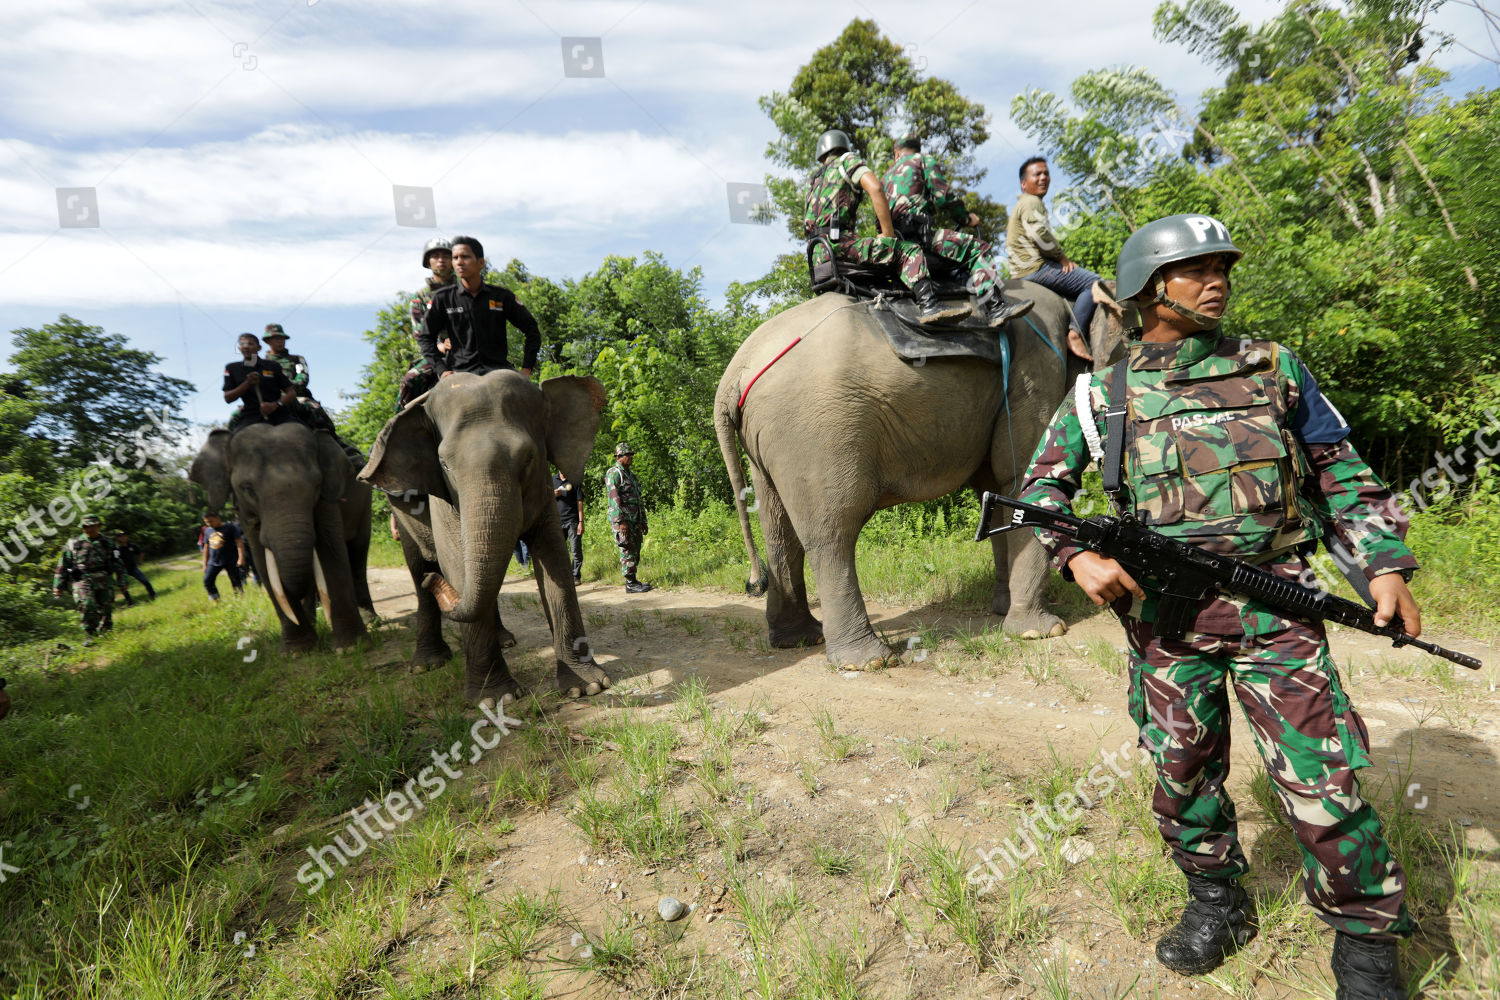 indonesian-military-police-unit-on-a-joint-patrol-with-elephants-at-cru-sampoinet-indonesia-shutterstock-editorial-10219956h.jpg